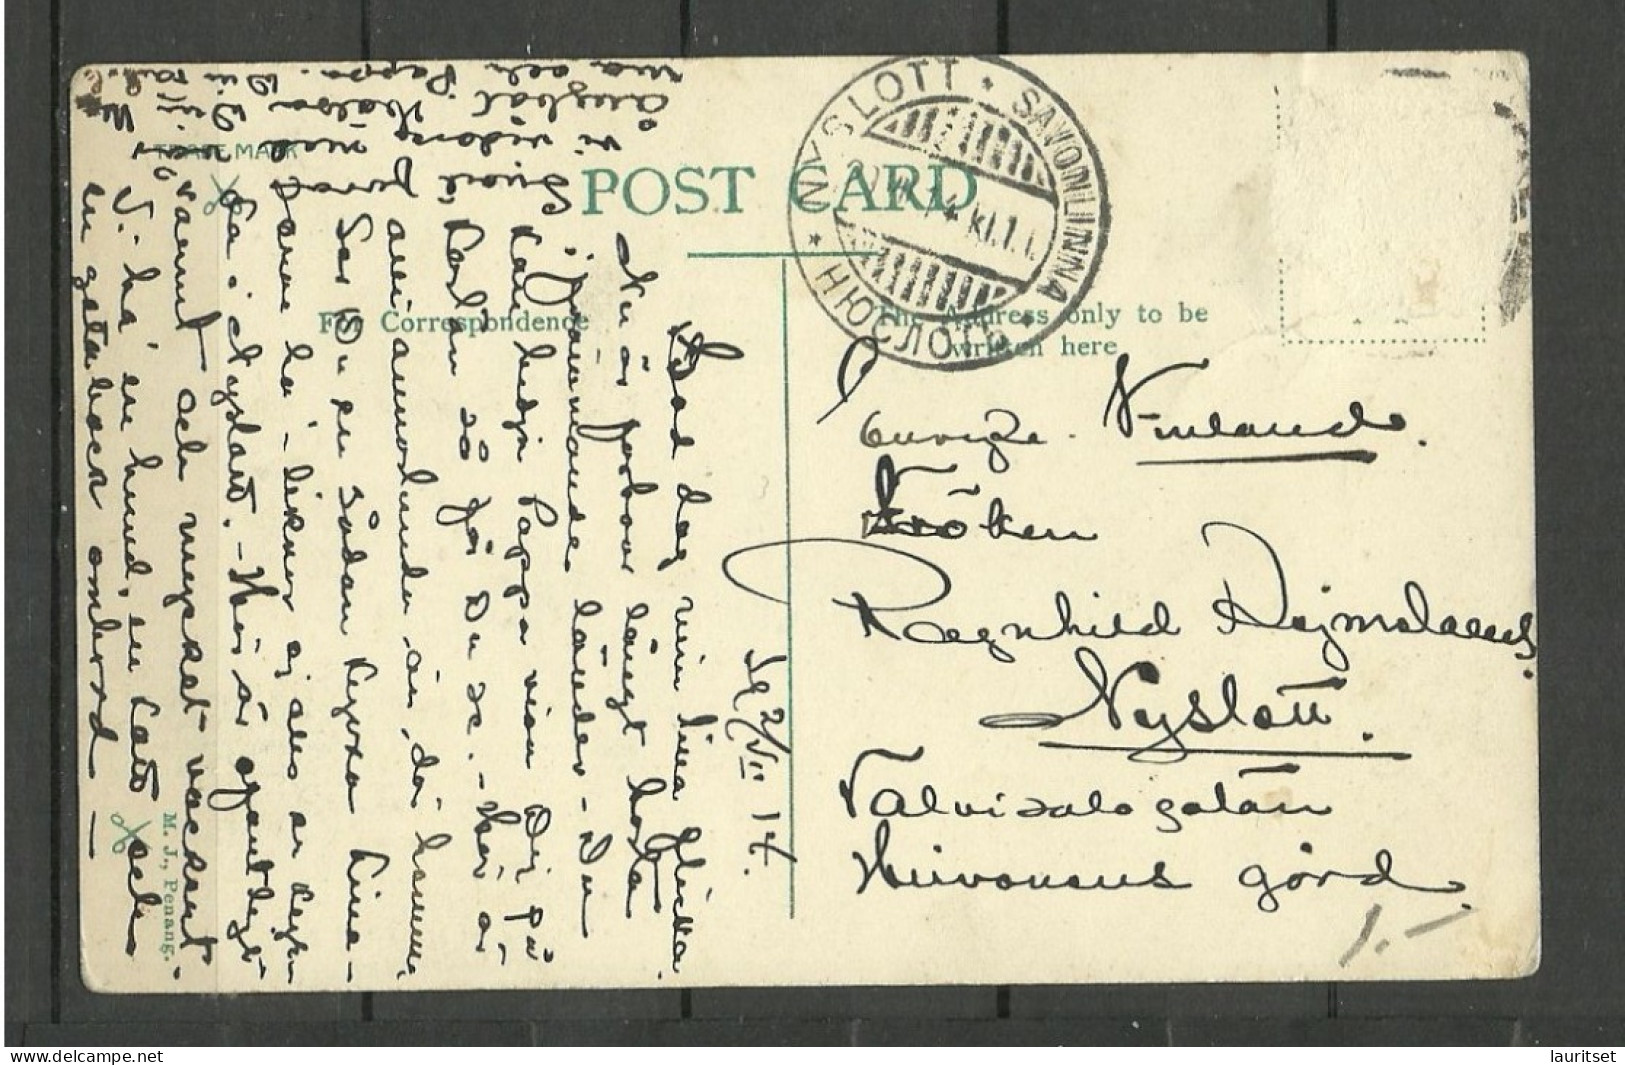 SINGAPORE Singapur 1914 Chinese Temple, Used, Sent To Finland Savonlinna (arrival Cancel), Stamp Missing - Singapore